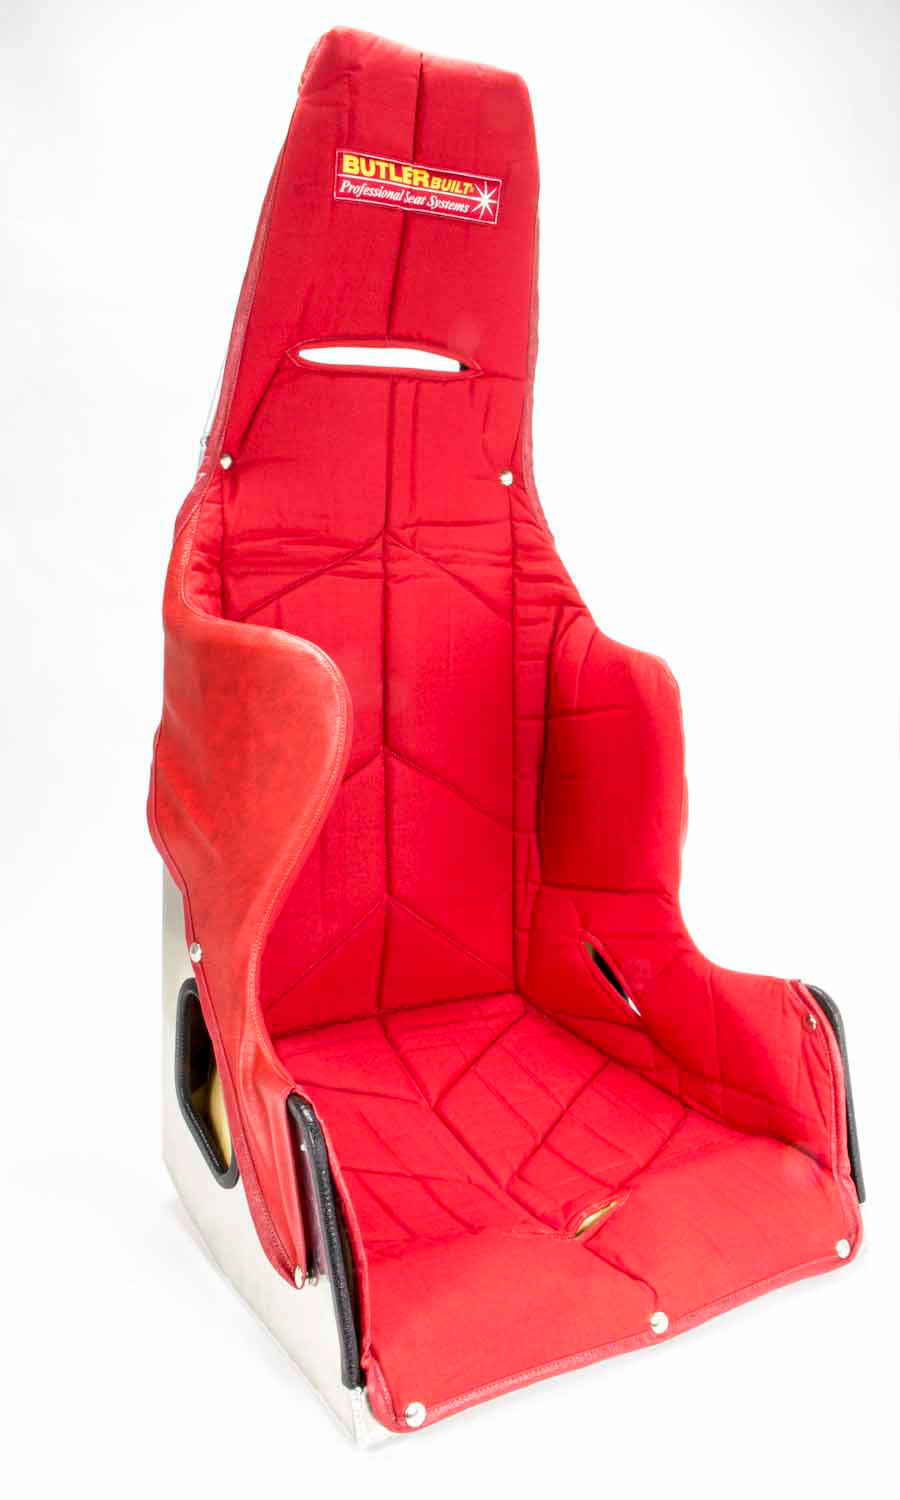 Butlerbuilt 18in Red Seat & Cover BUT18A120-65-4104